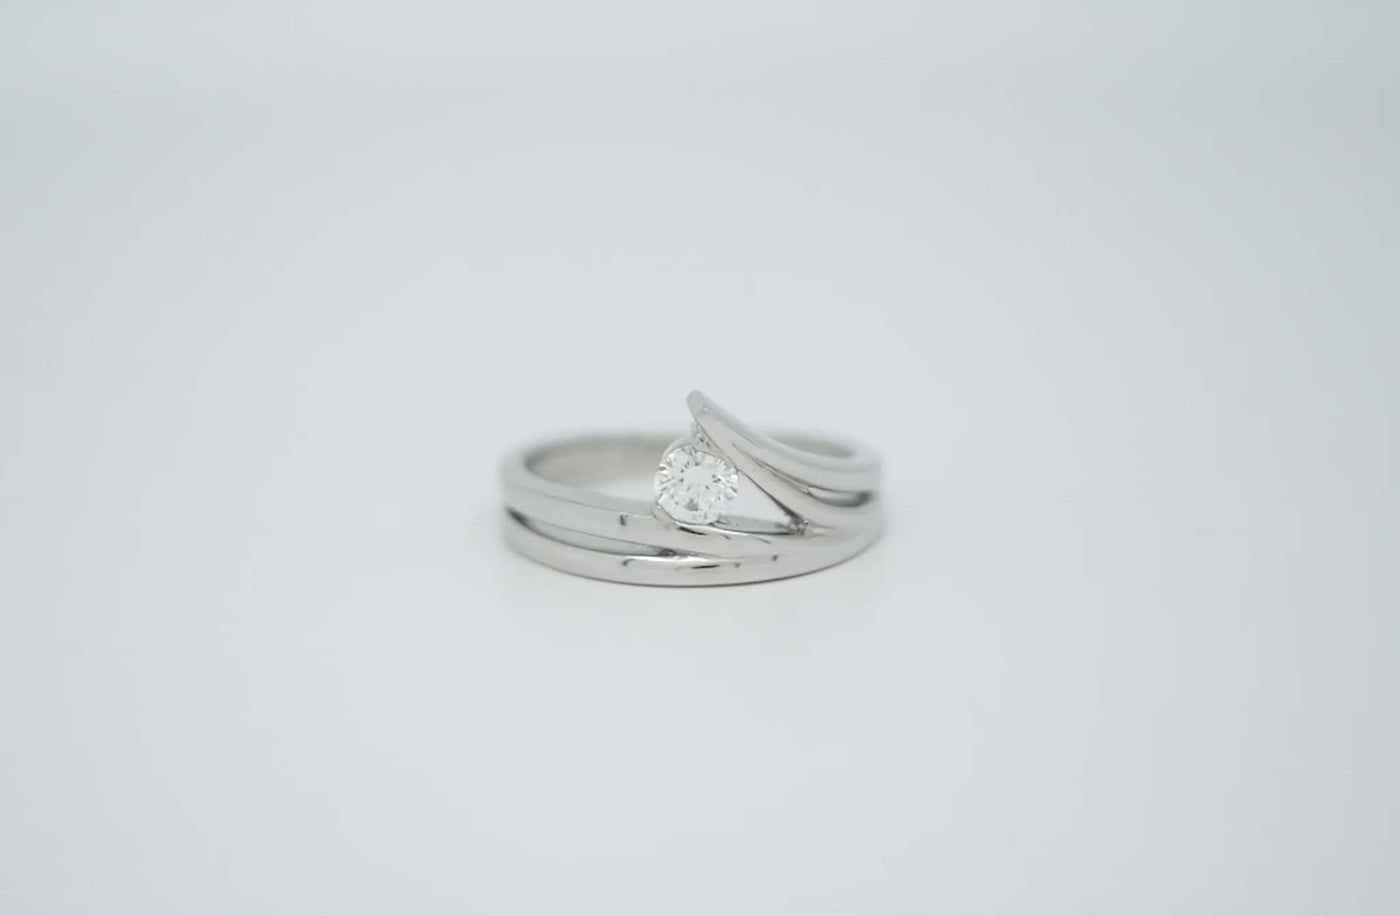 Inspired Collection, Waved, Wavey, Waves, ocean, surf, surfer, Platinum, 18k, 18ct White gold, brilliant cut, round cut, specialist, contemporary, modern, jewellery, jewelry, engagement ring, ring design, inspired design, tension setting, delicate, 360 video